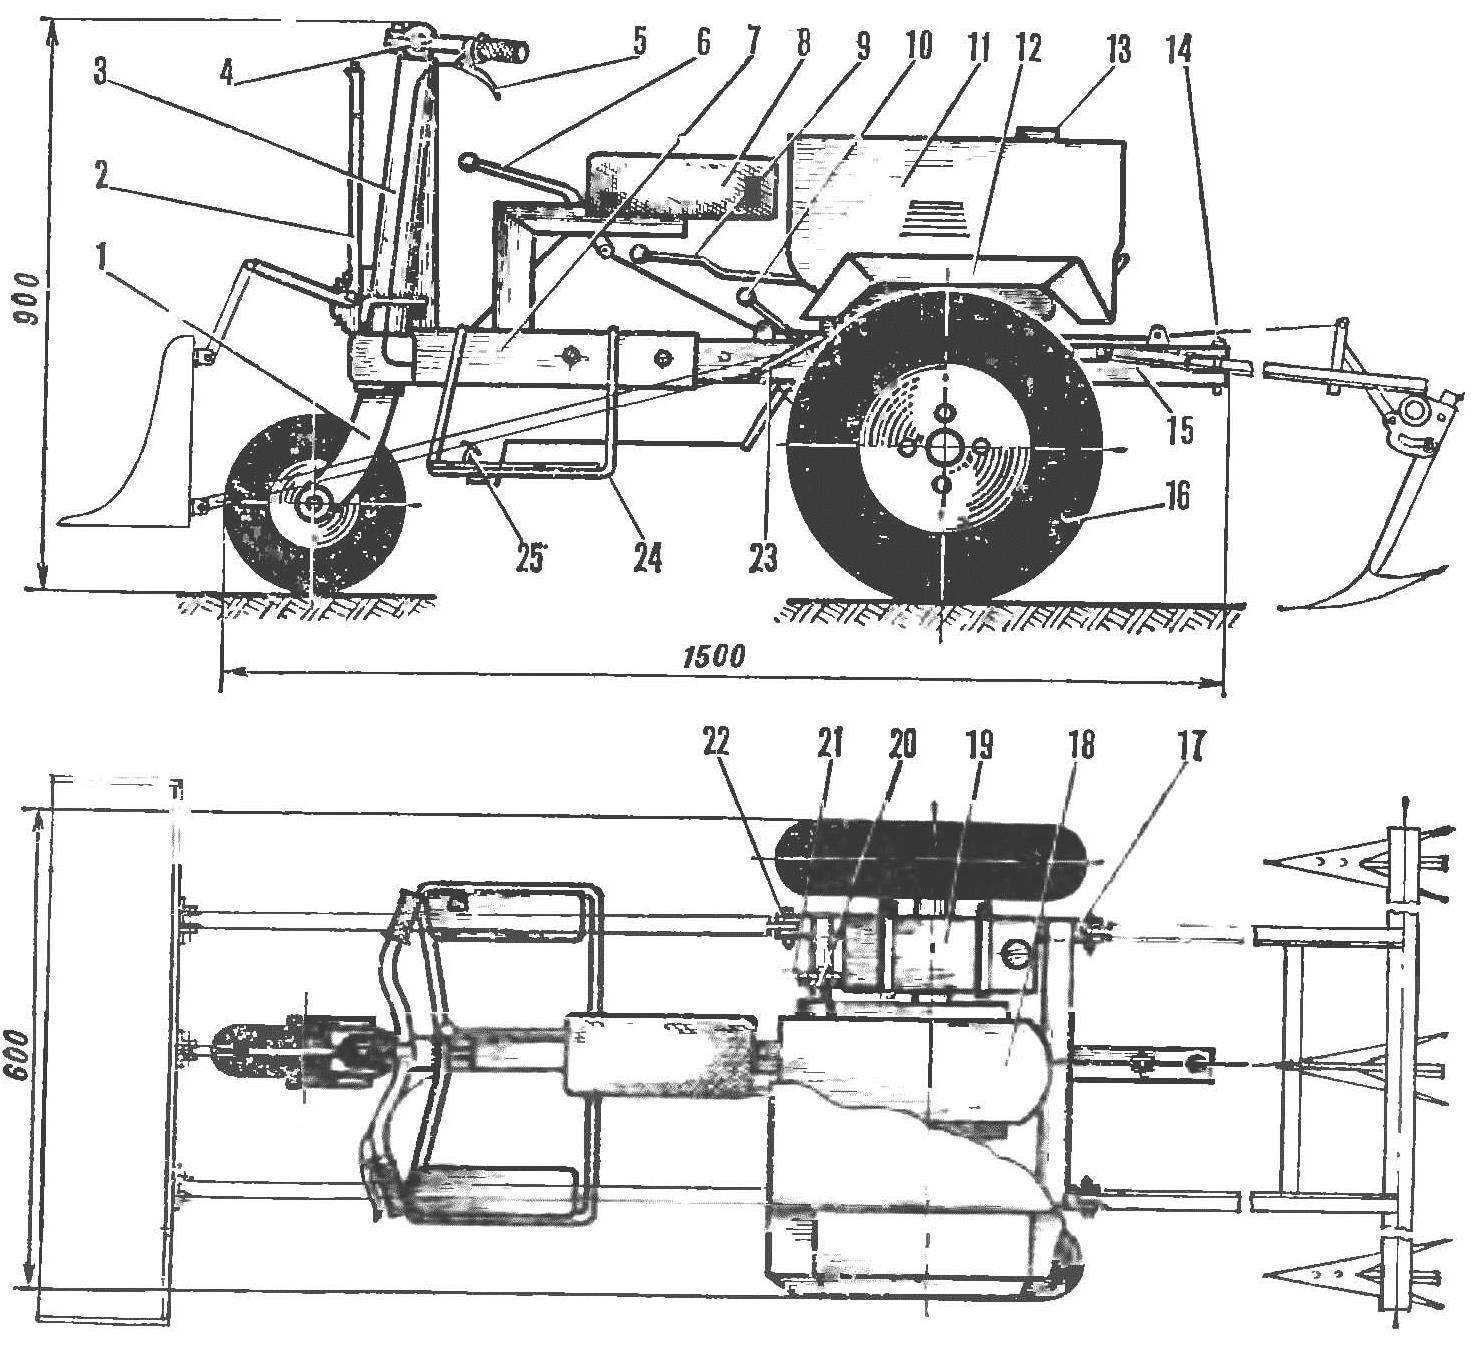 Fig. 2. The device tillers